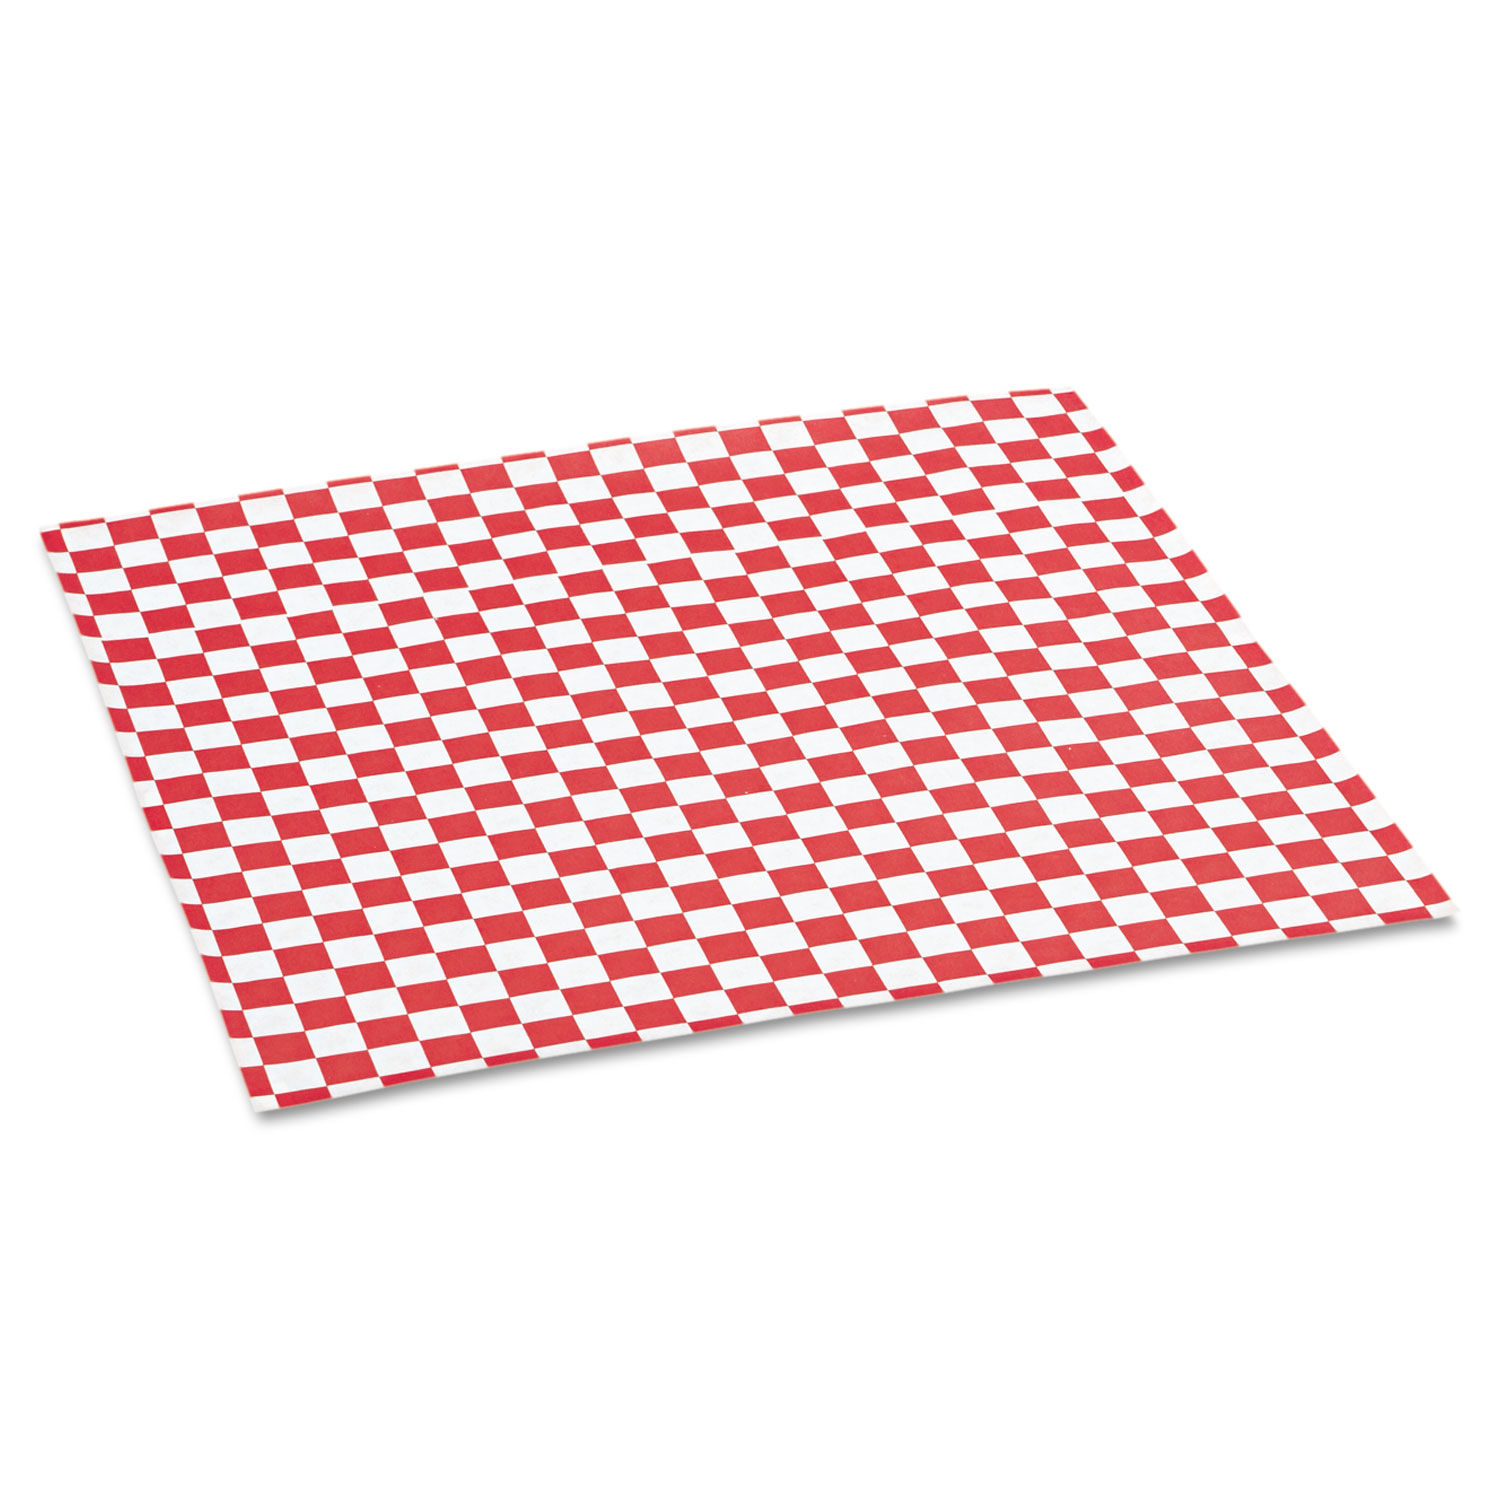 Grease Resistant Paper Sheets, Blue Checkered, 12 x 12 for $27.33